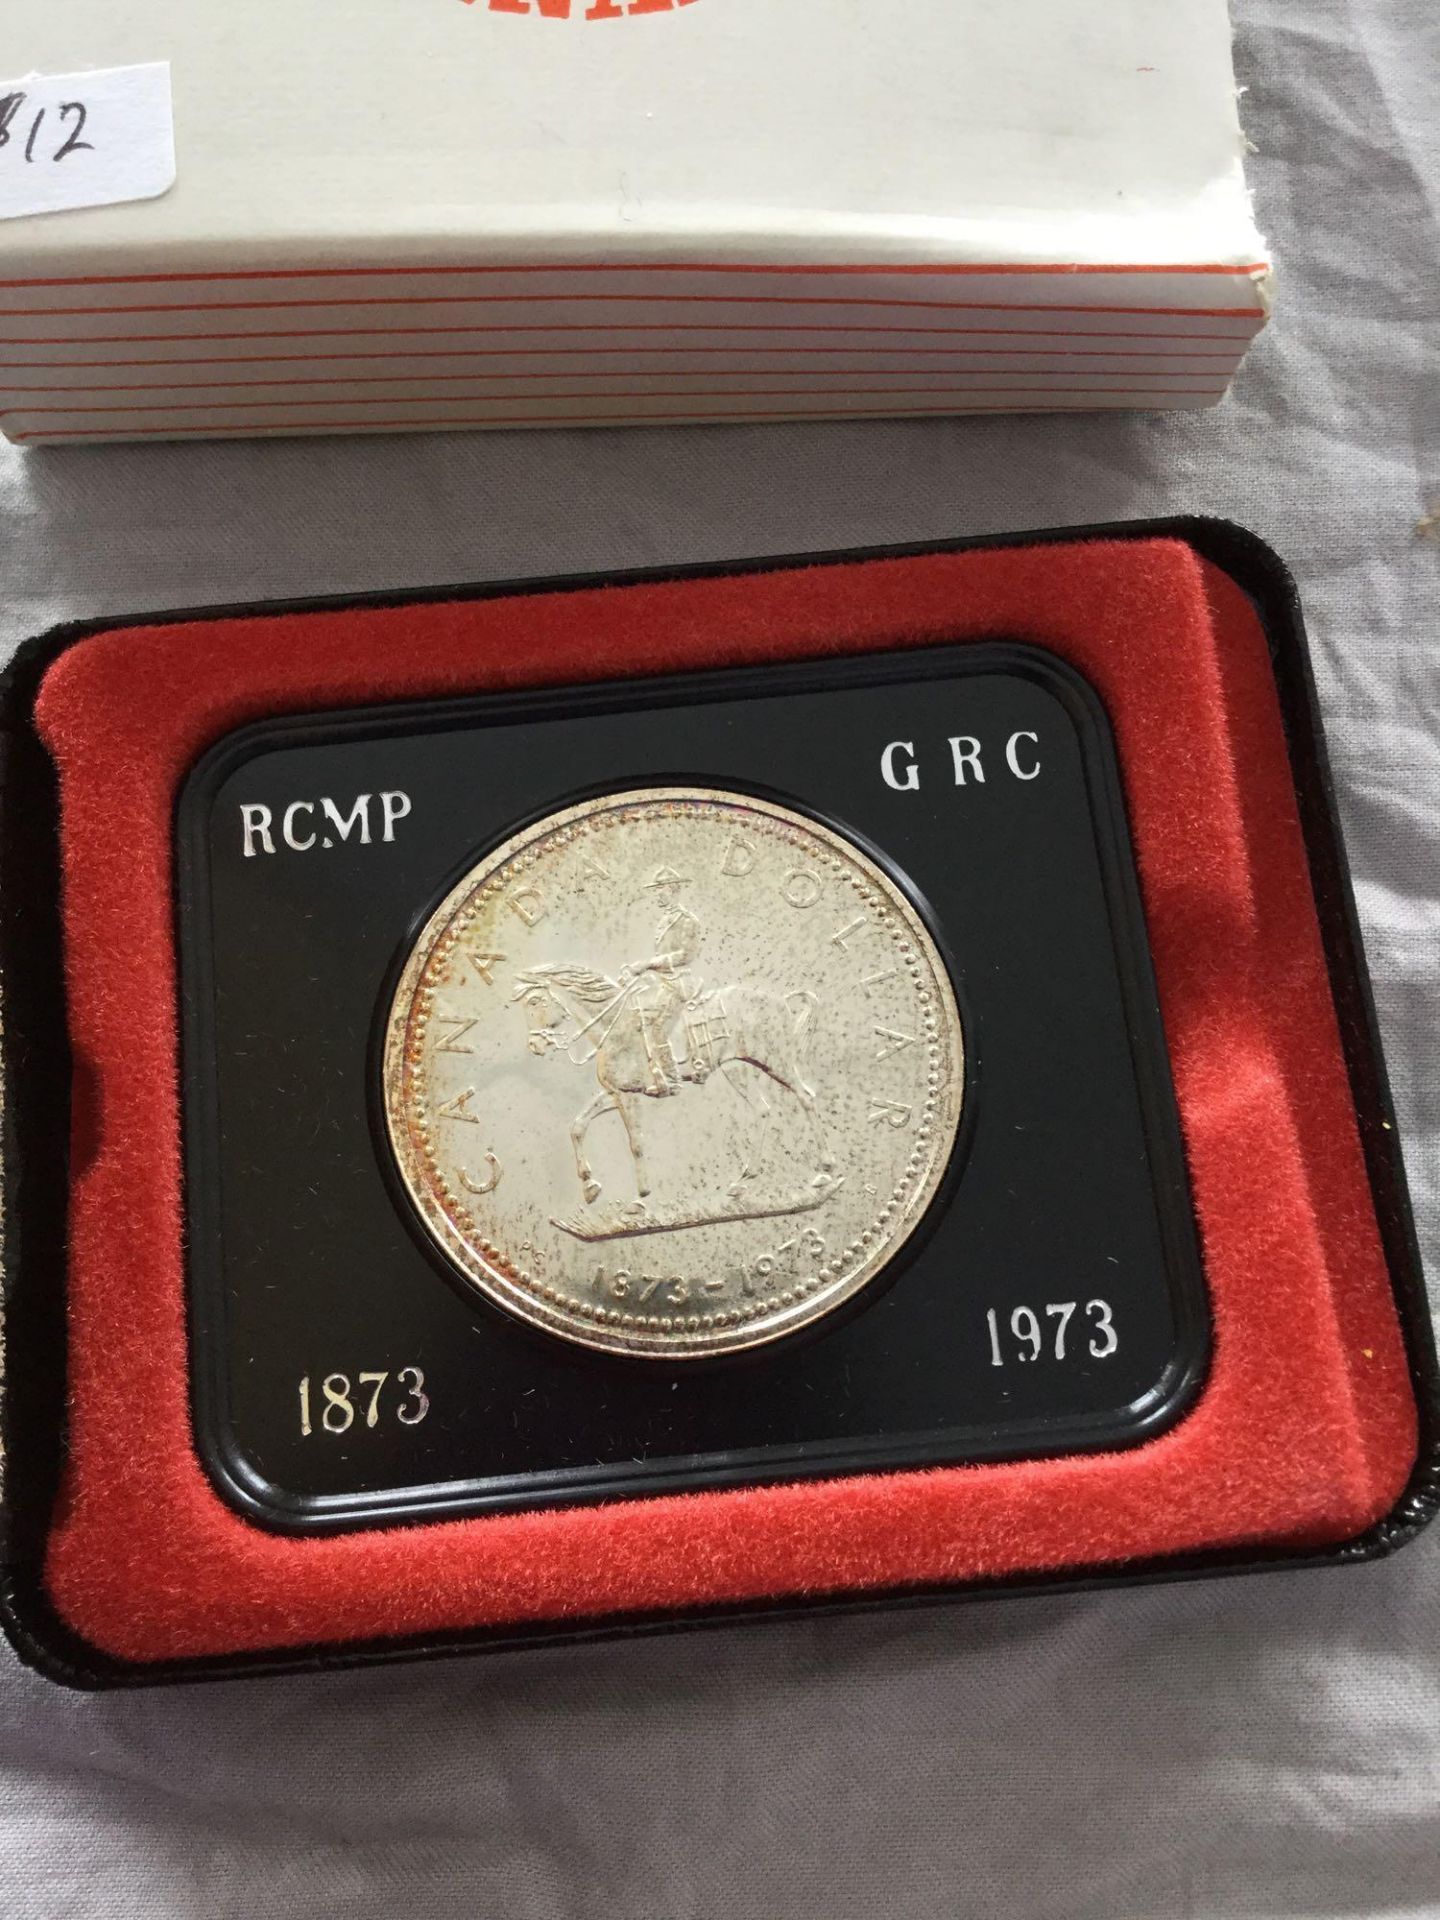 1873-1973 Royal Canadian Mint - RCMP GRC Canada Silver Dollar Coin Special Edition - Image 2 of 3